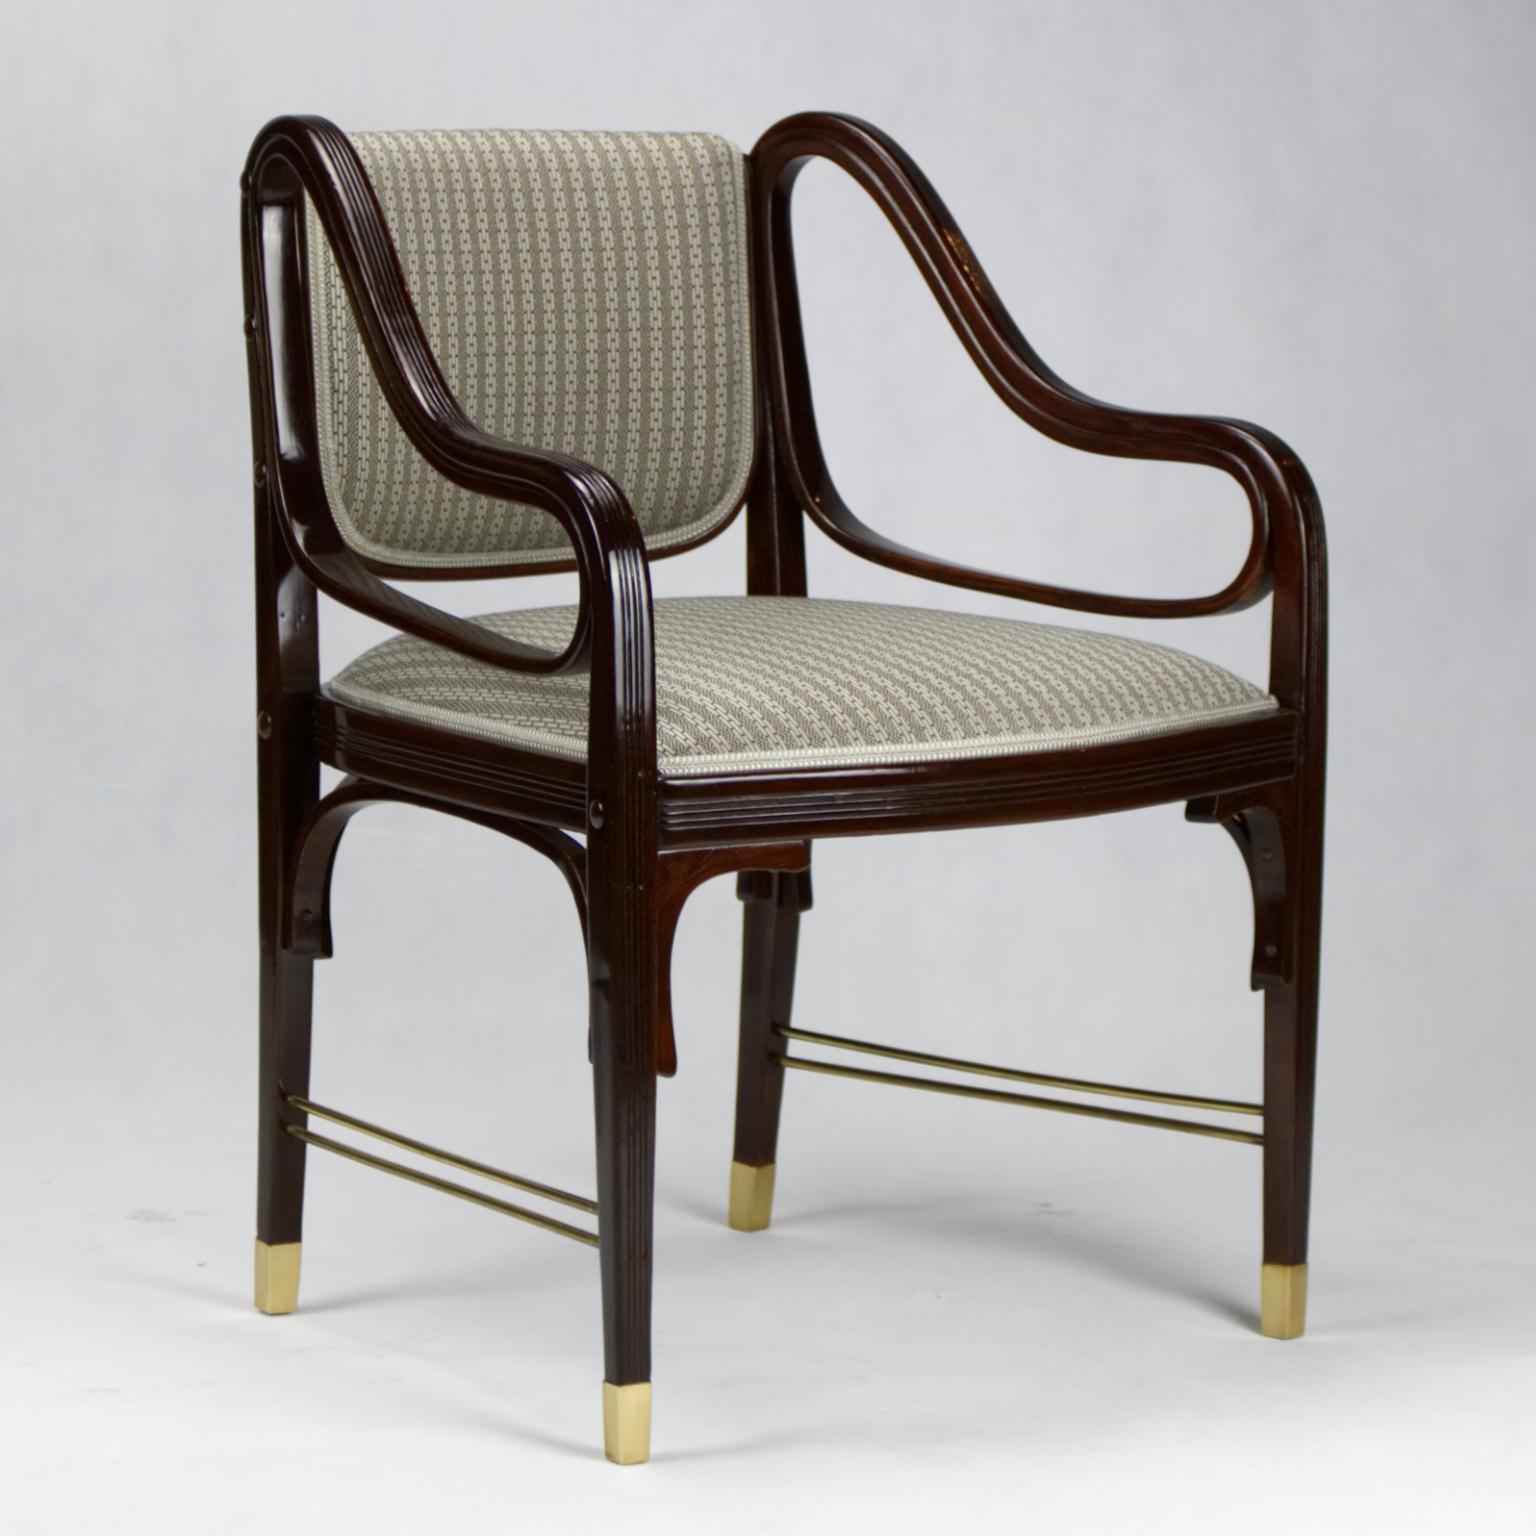 Jacob & Josef Kohn Vienna Art Nouveau Armchair No. 412 by Otto Wagner, 1904 In Good Condition For Sale In Lucenec, SK